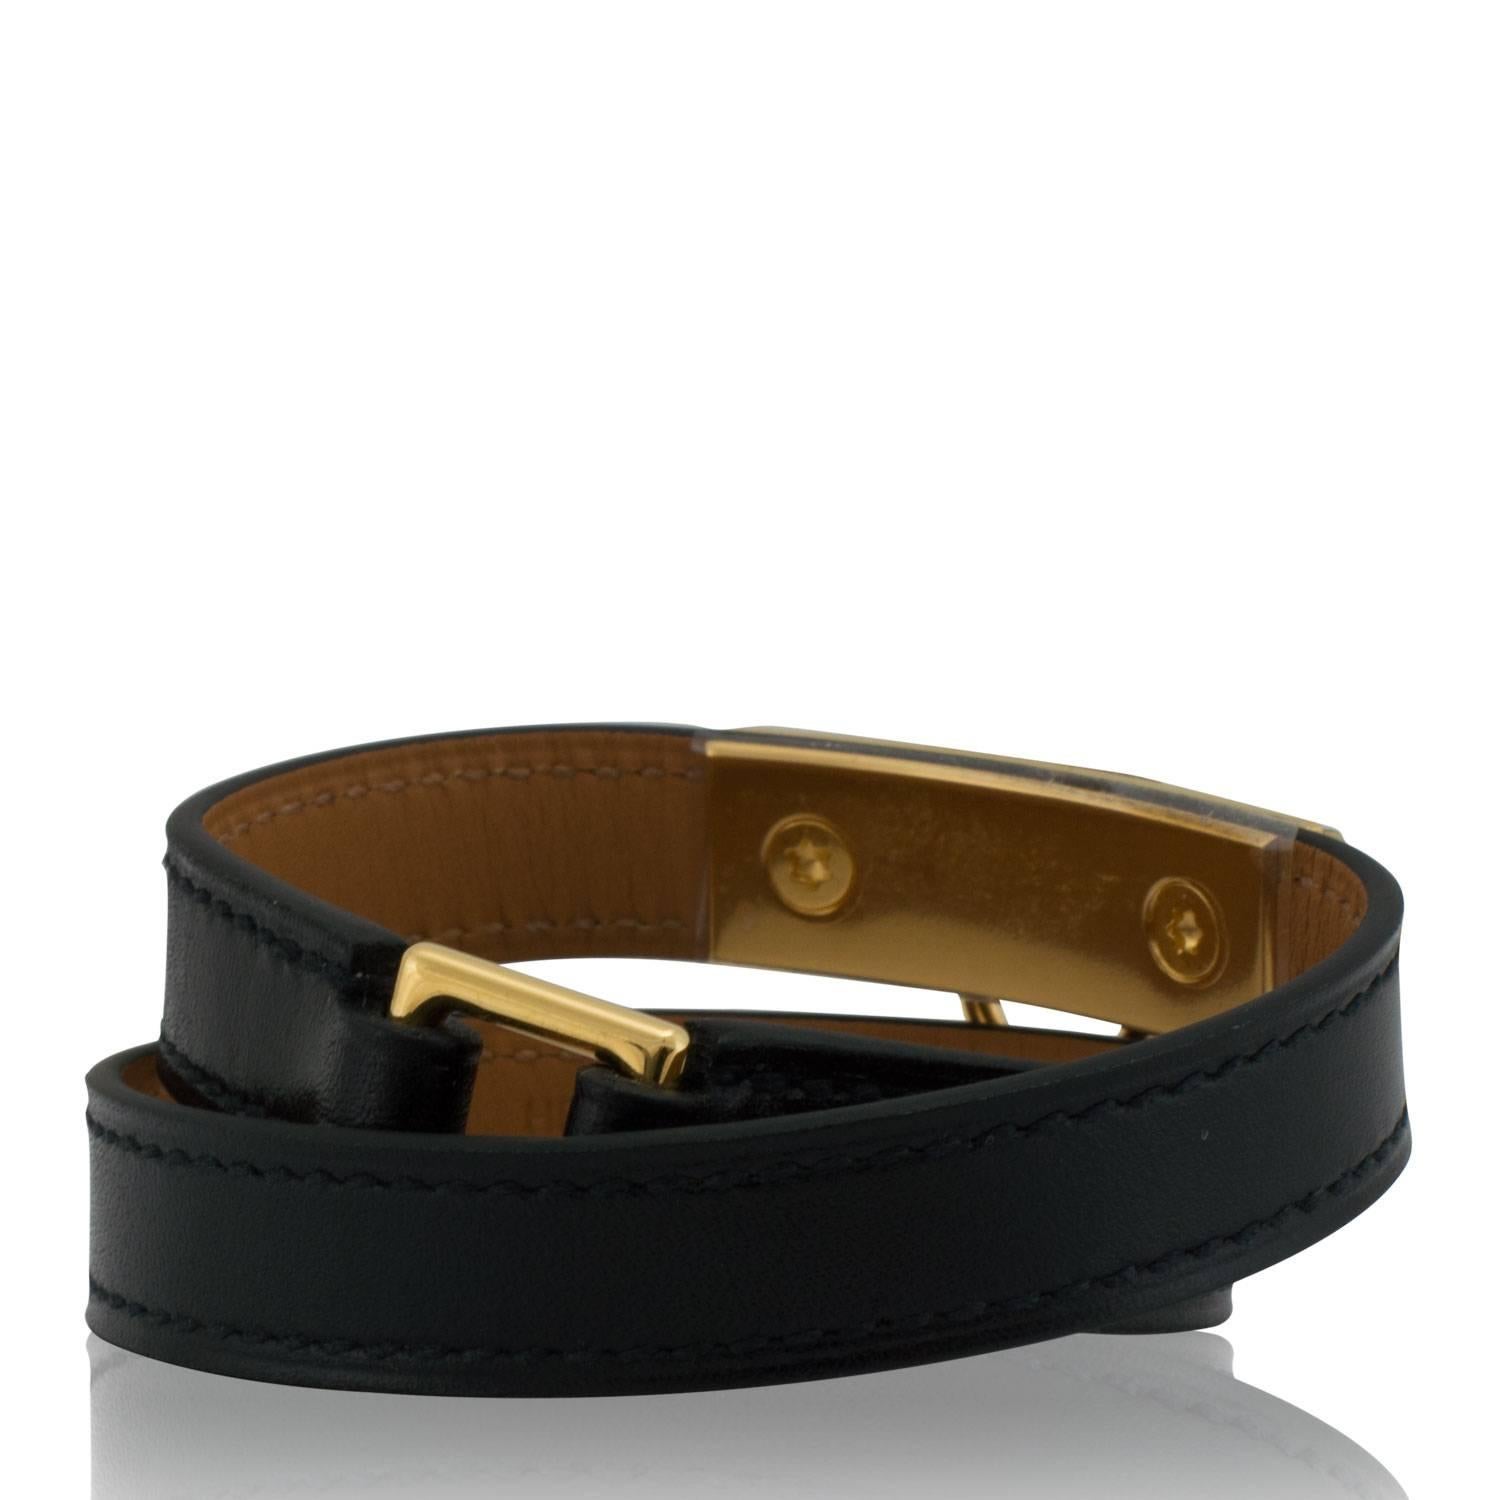 Hermes Bracelet Rivale Double Tour Epsom Leather Black Color S Size Gold Hardware 2016

Pristine. Pre-owned and never used.

Bought it in Hermes store in 2016.

Size: S.

14